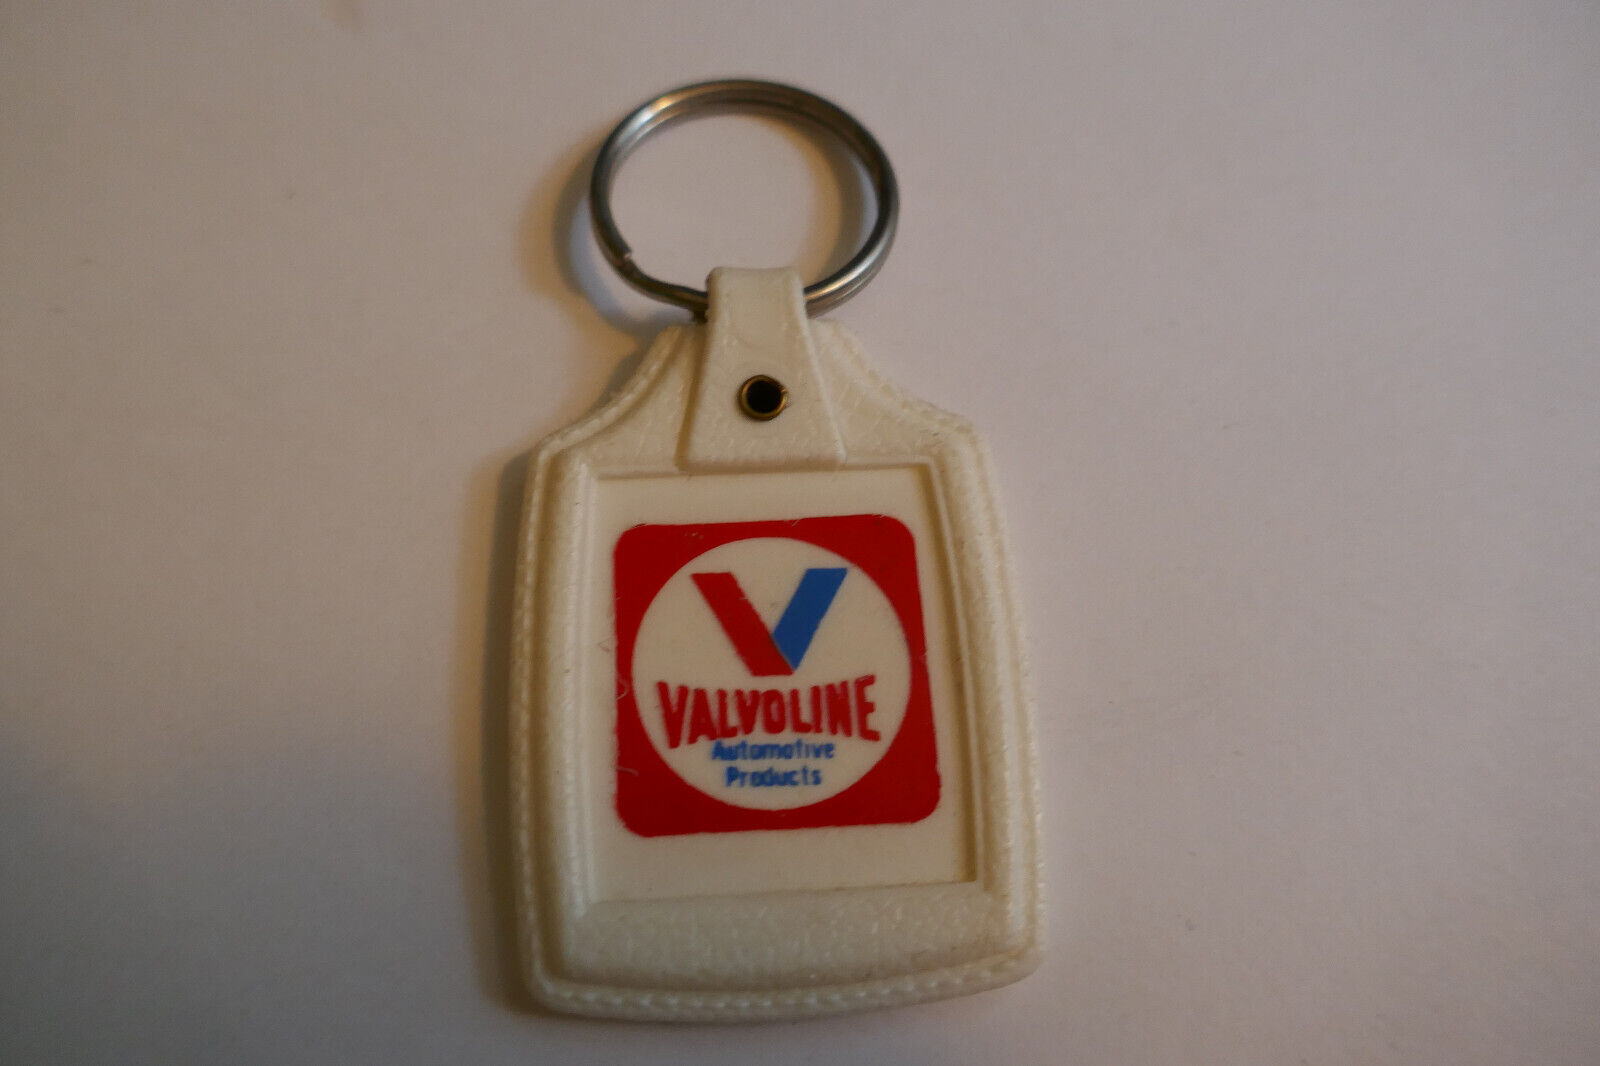 Vintage Valvoline Automotive Products   Key Chain  in Good Condtion 